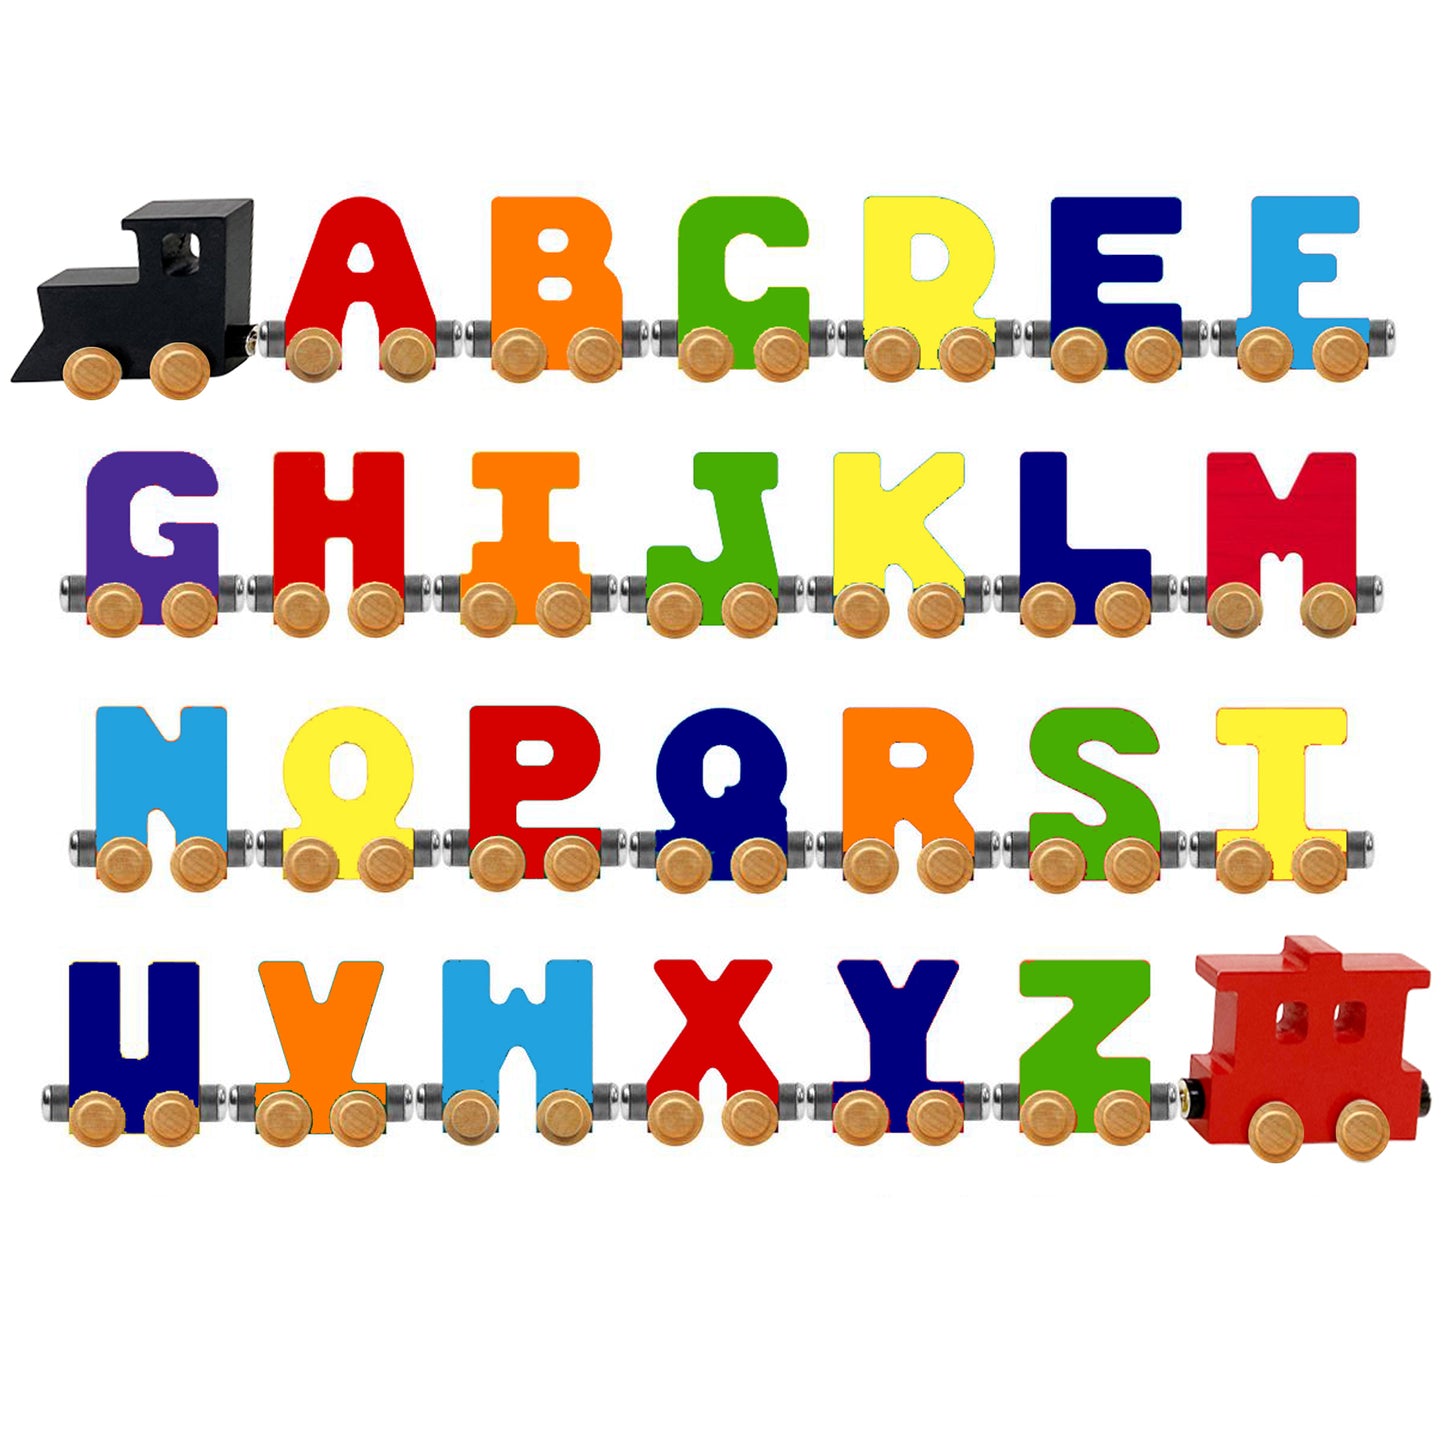 10 Letter Train Wooden Perosnalized Name Letters Includes Train & Wagon Letters Puzzle Includes Train & Wagon Free